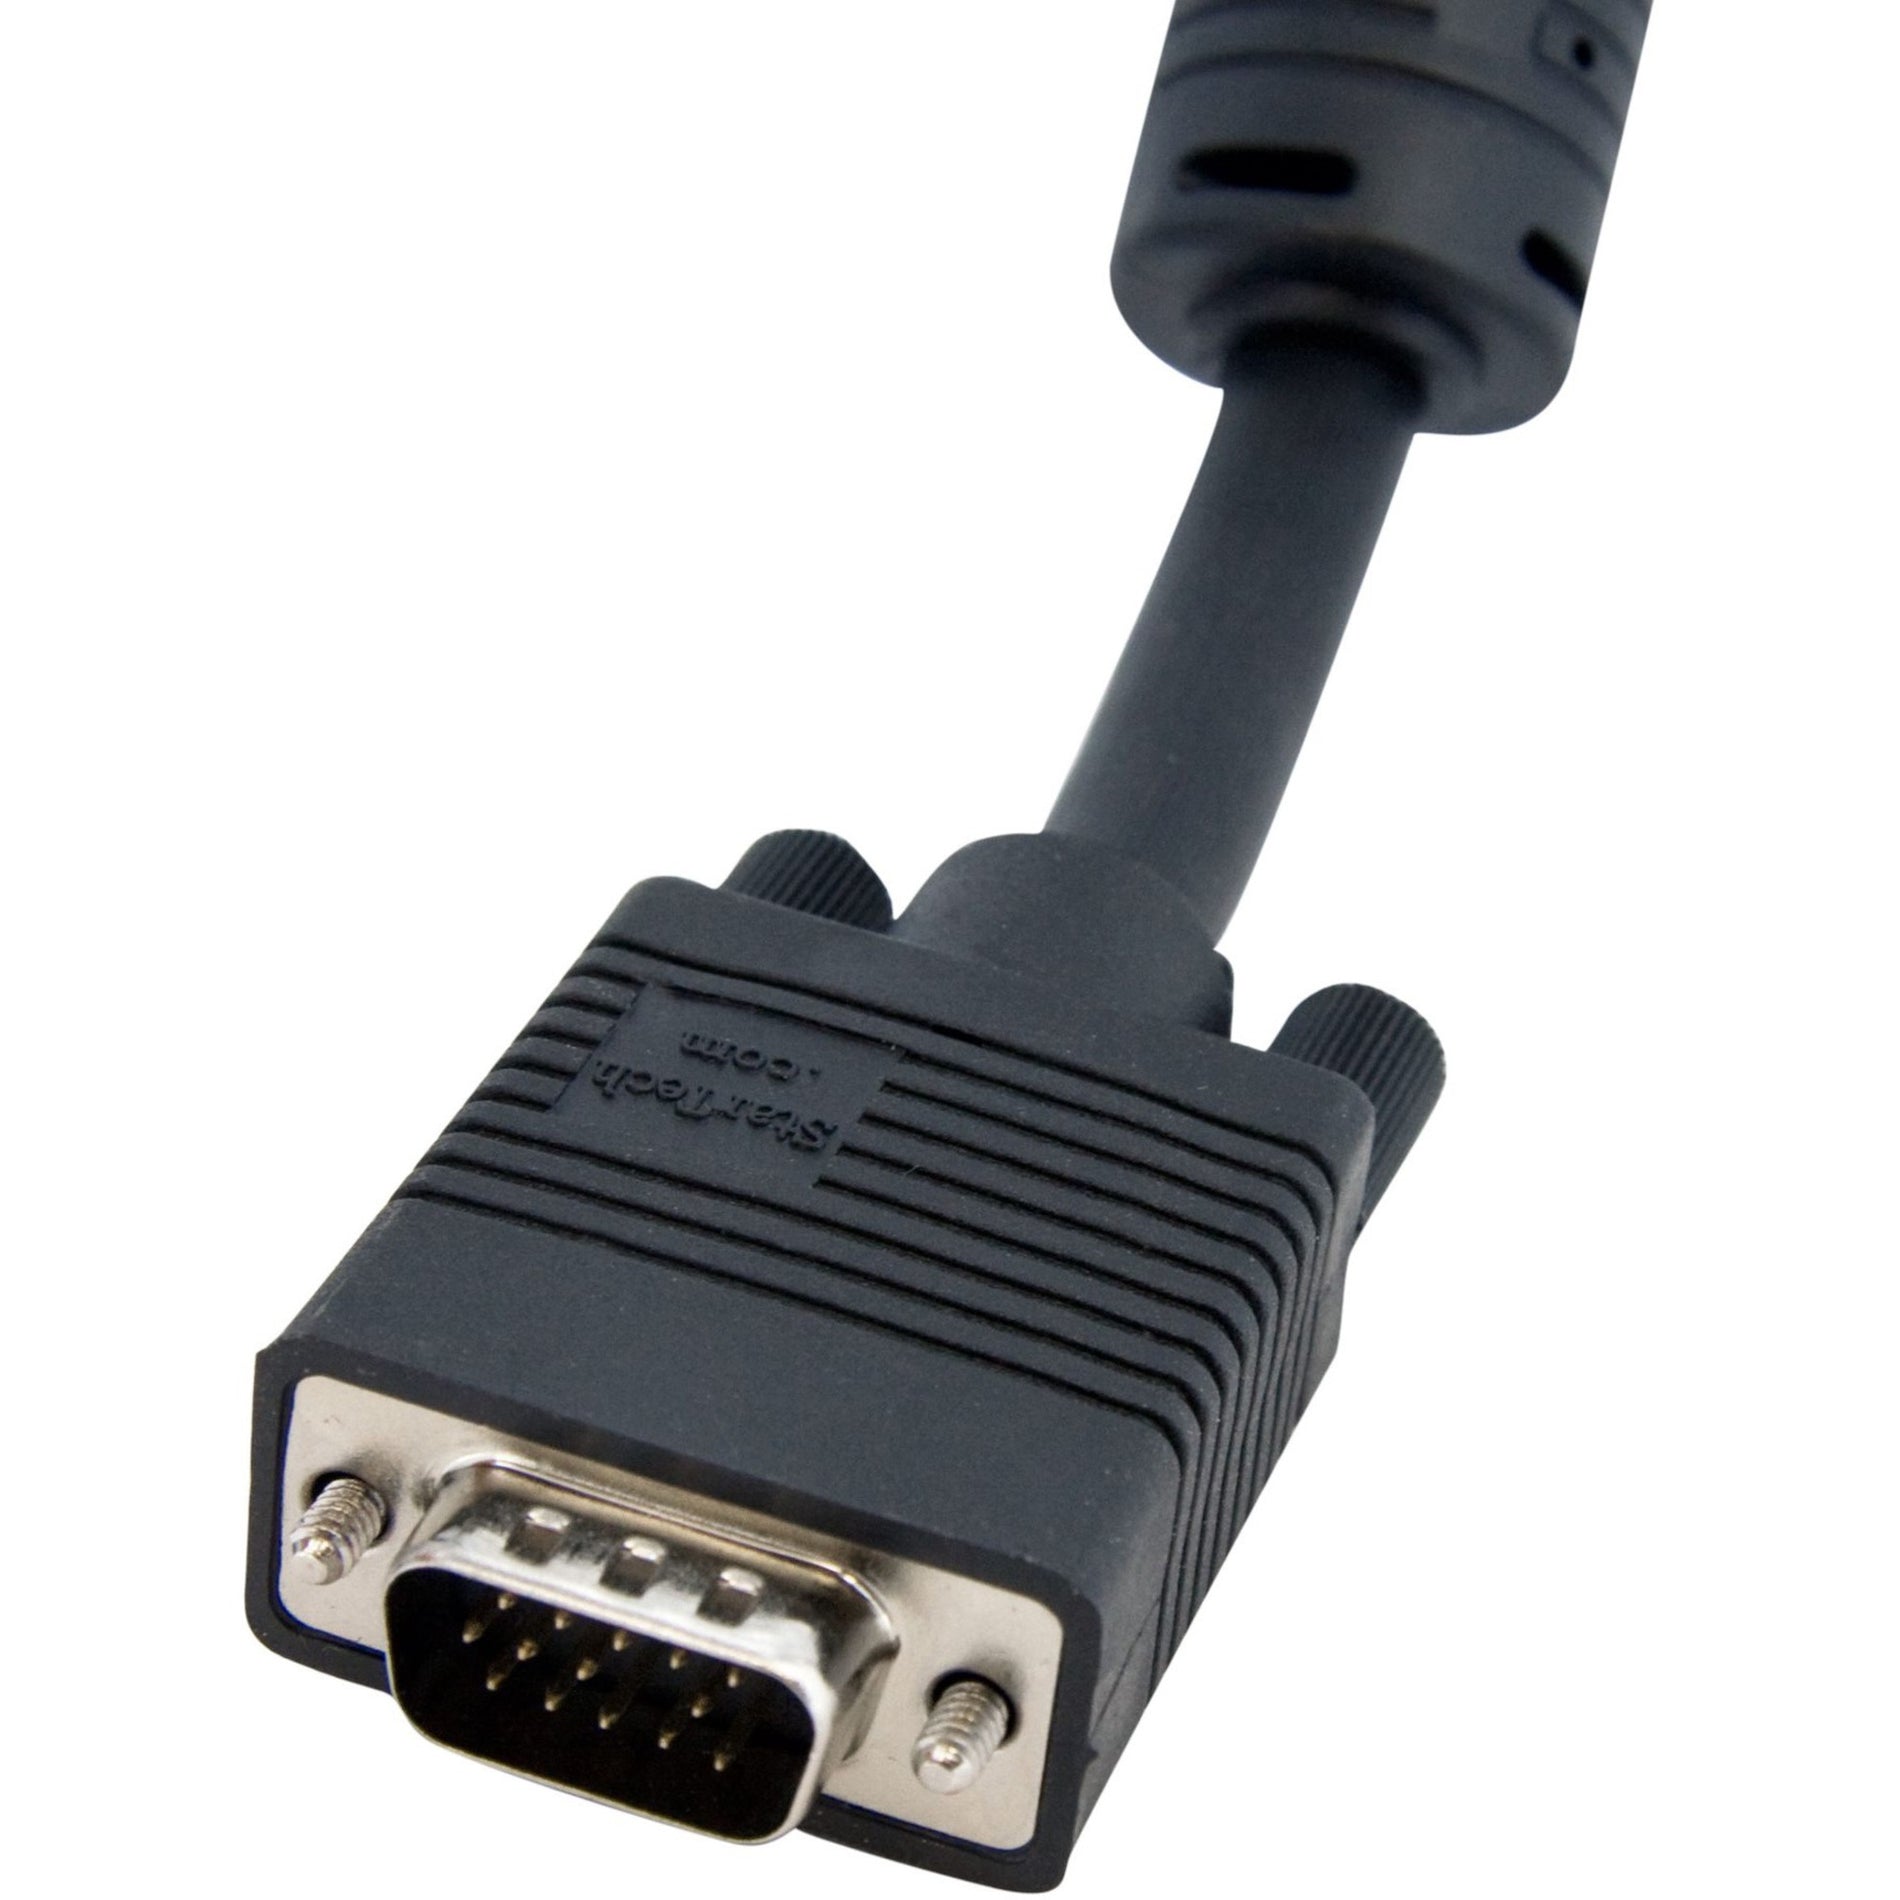 StarTech.com MXT101HQ10 High-Resolution Coaxial SVGA Monitor Extension Cable, 10 ft, VGA Video Cable